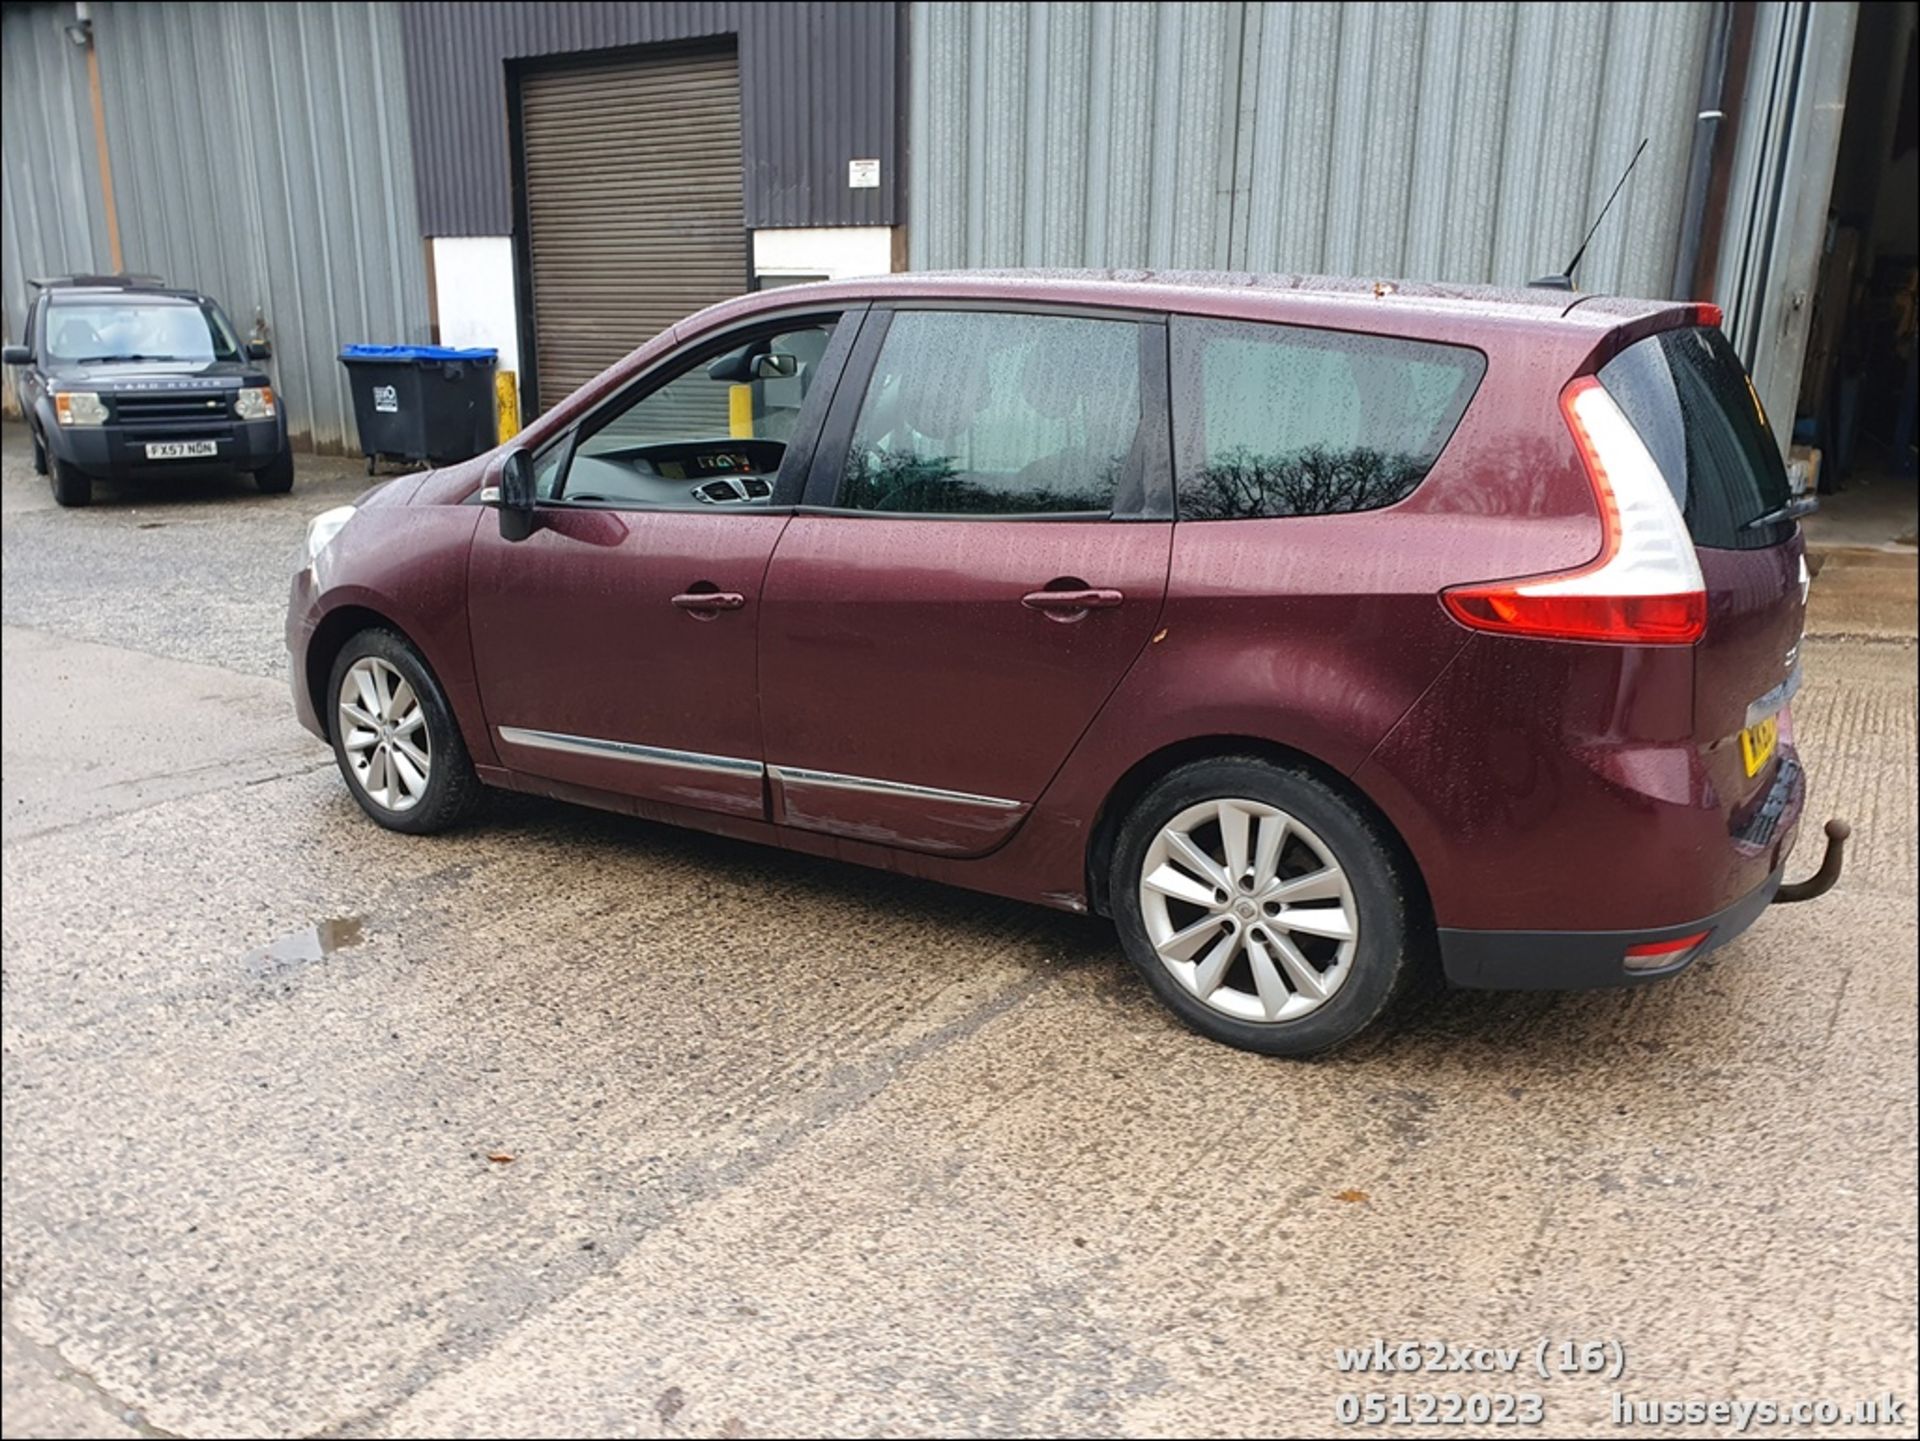 12/62 RENAULT G SCENIC D-QUETTLUXE NRG - 1598cc 5dr MPV (Red) - Image 17 of 53